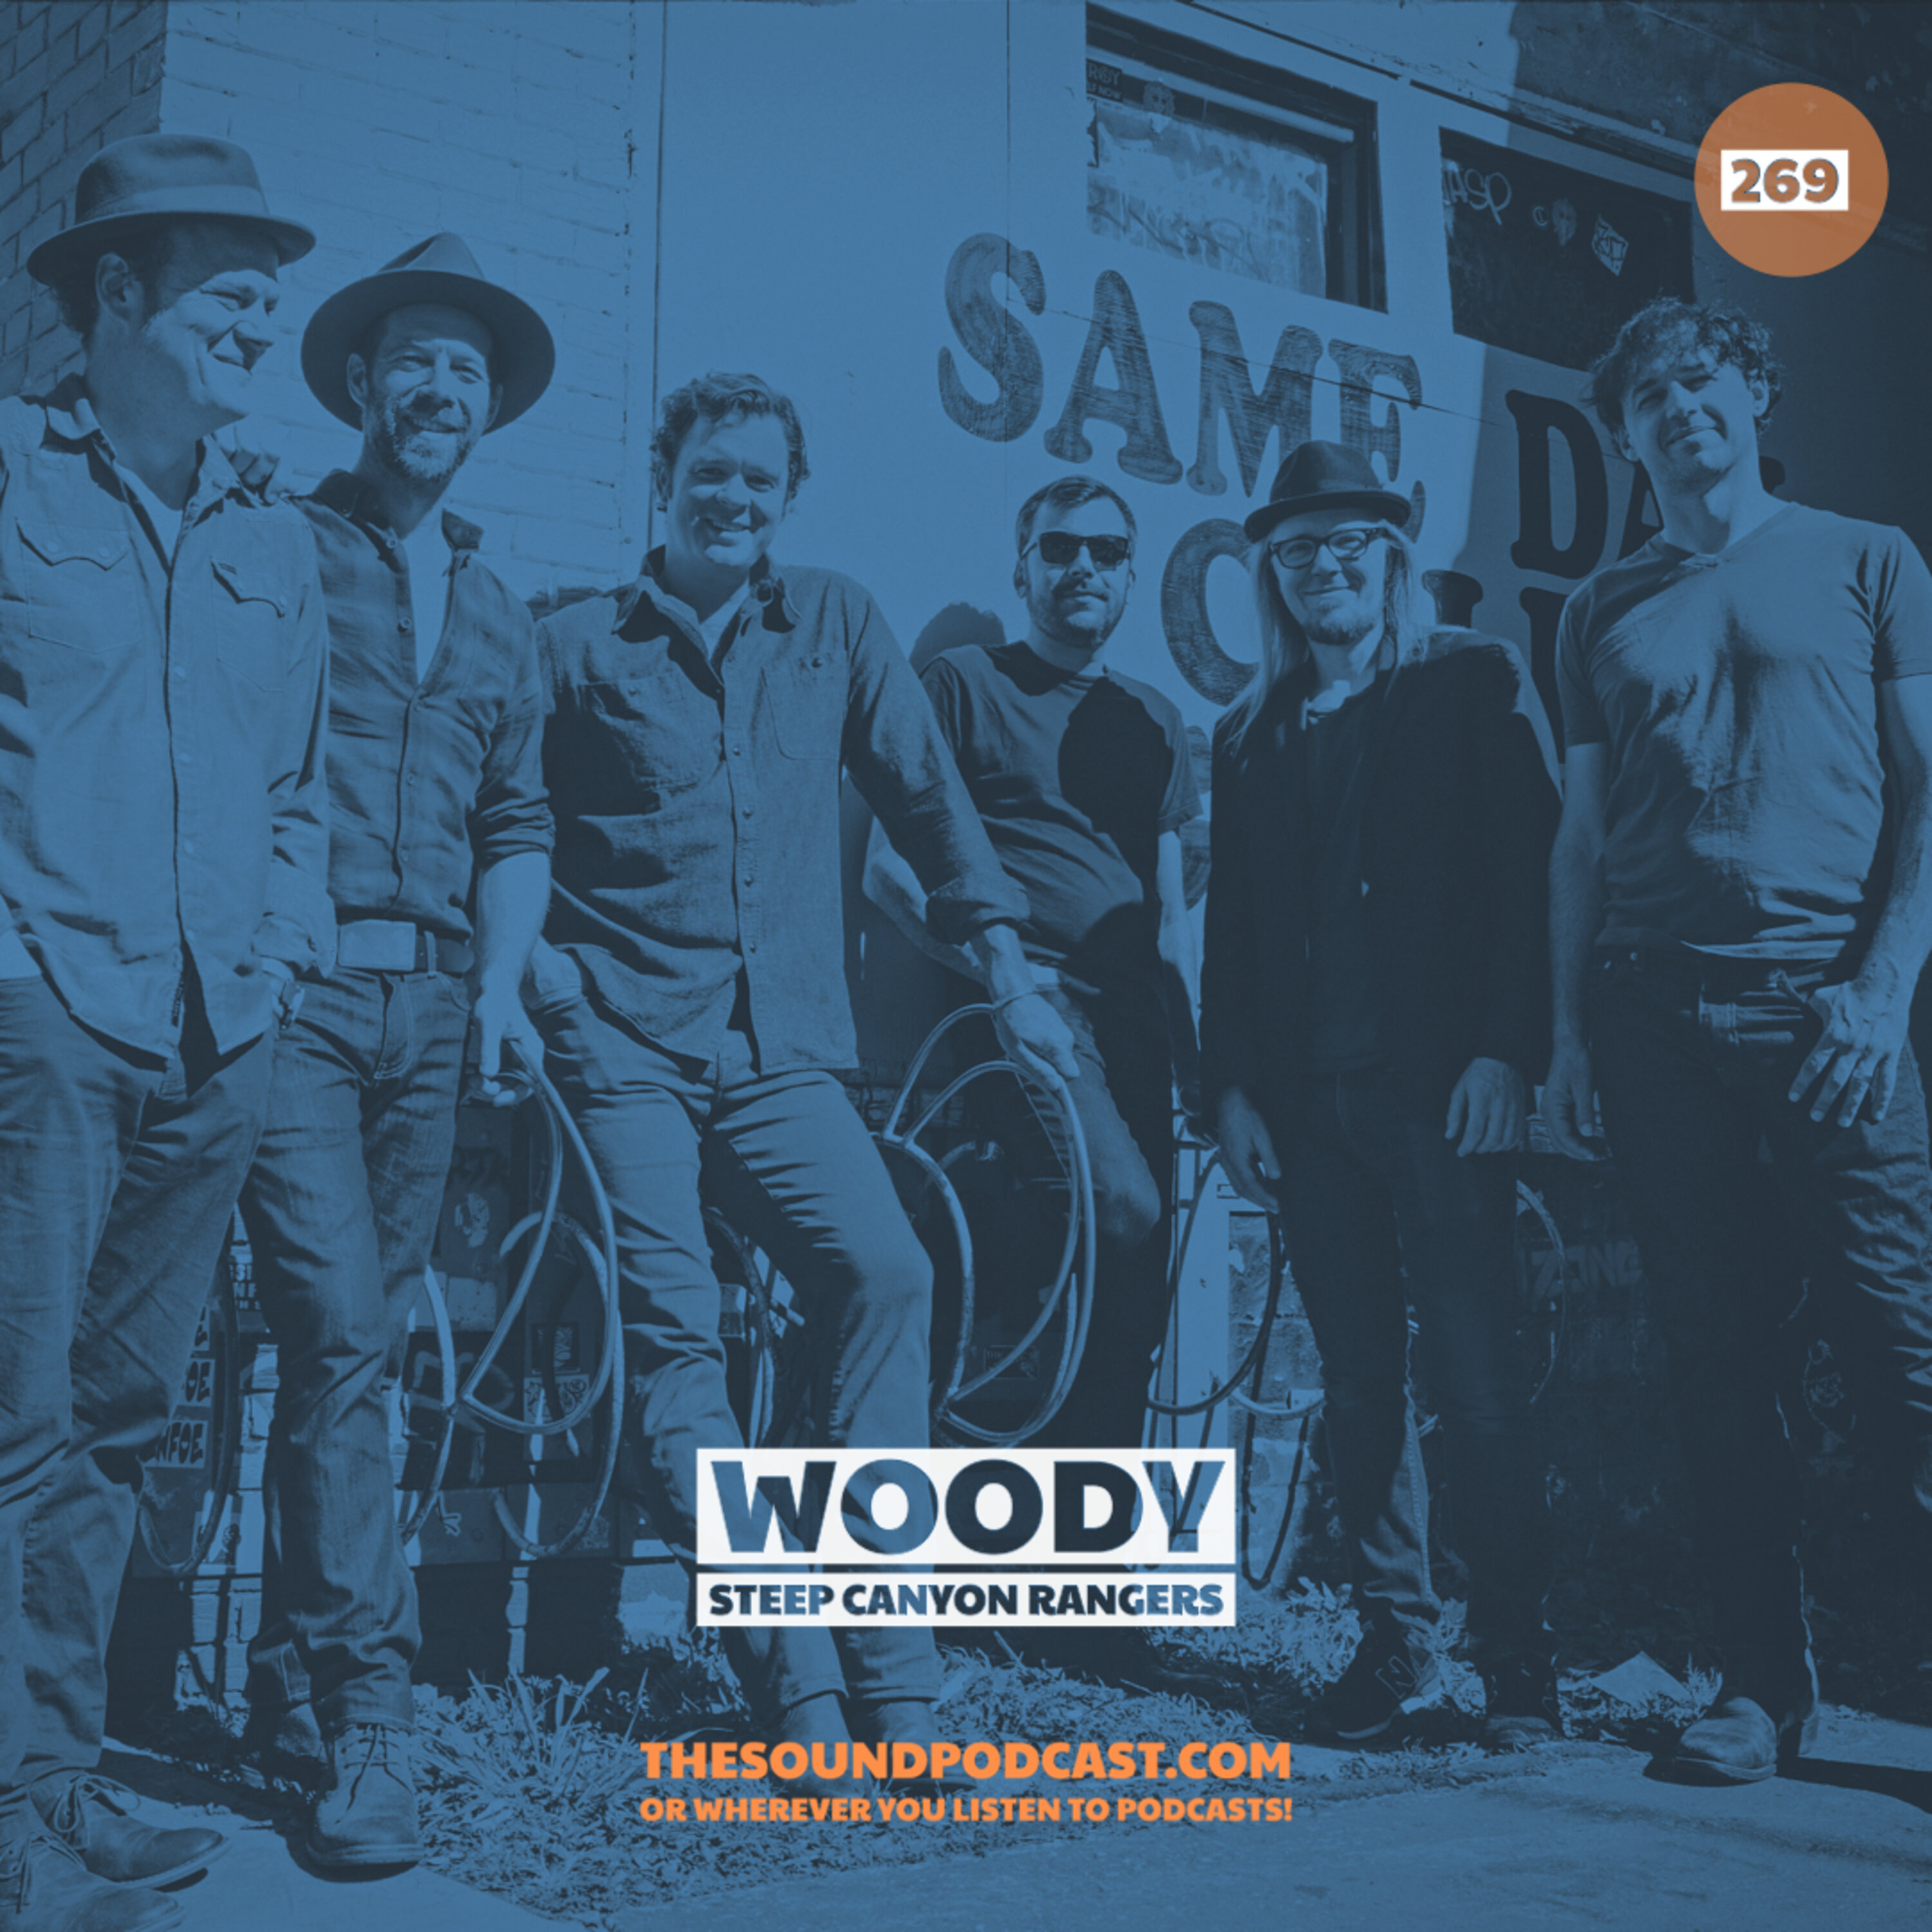 Woody from The Steep Canyon Rangers Image